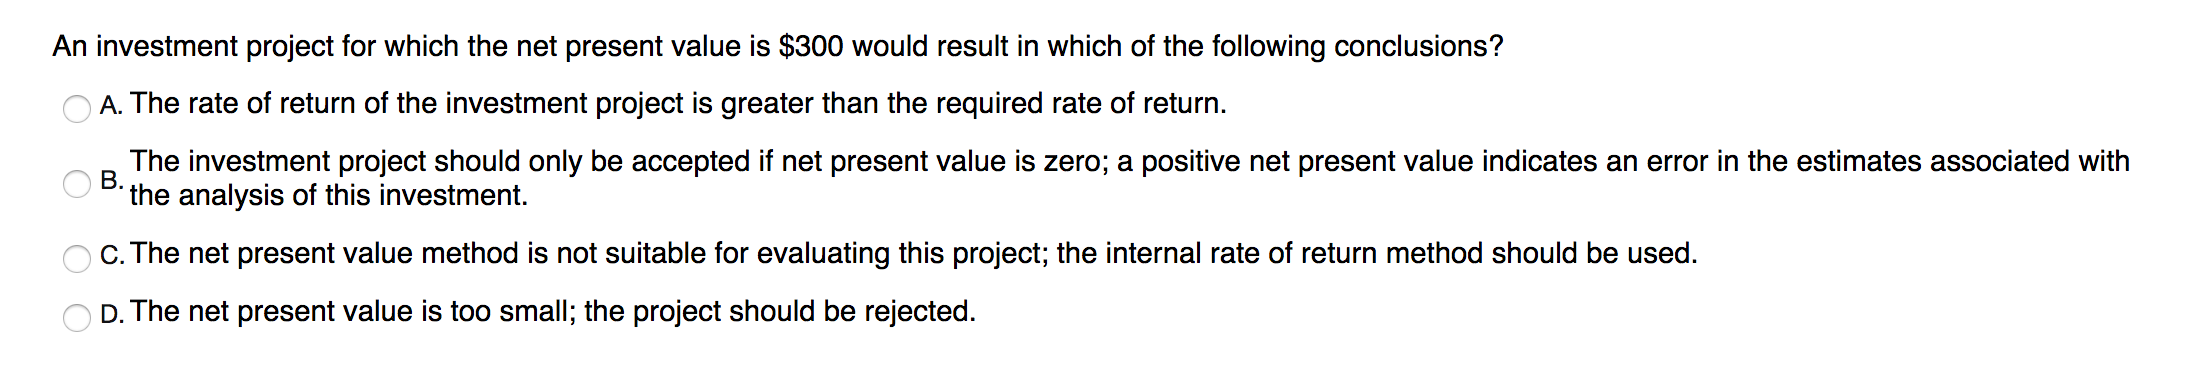 An investment project for which the net present value is $300 would result in which of the following conclusions?
O A. The rate of return of the investment project is greater than the required rate of return.
The investment project should only be accepted if net present value is zero; a positive net present value indicates an error in the estimates associated with
the analysis of this investment.
O B.
C. The net present value method is not suitable for evaluating this project; the internal rate of return method should be used.
D. The net present value is too small; the project should be rejected.
